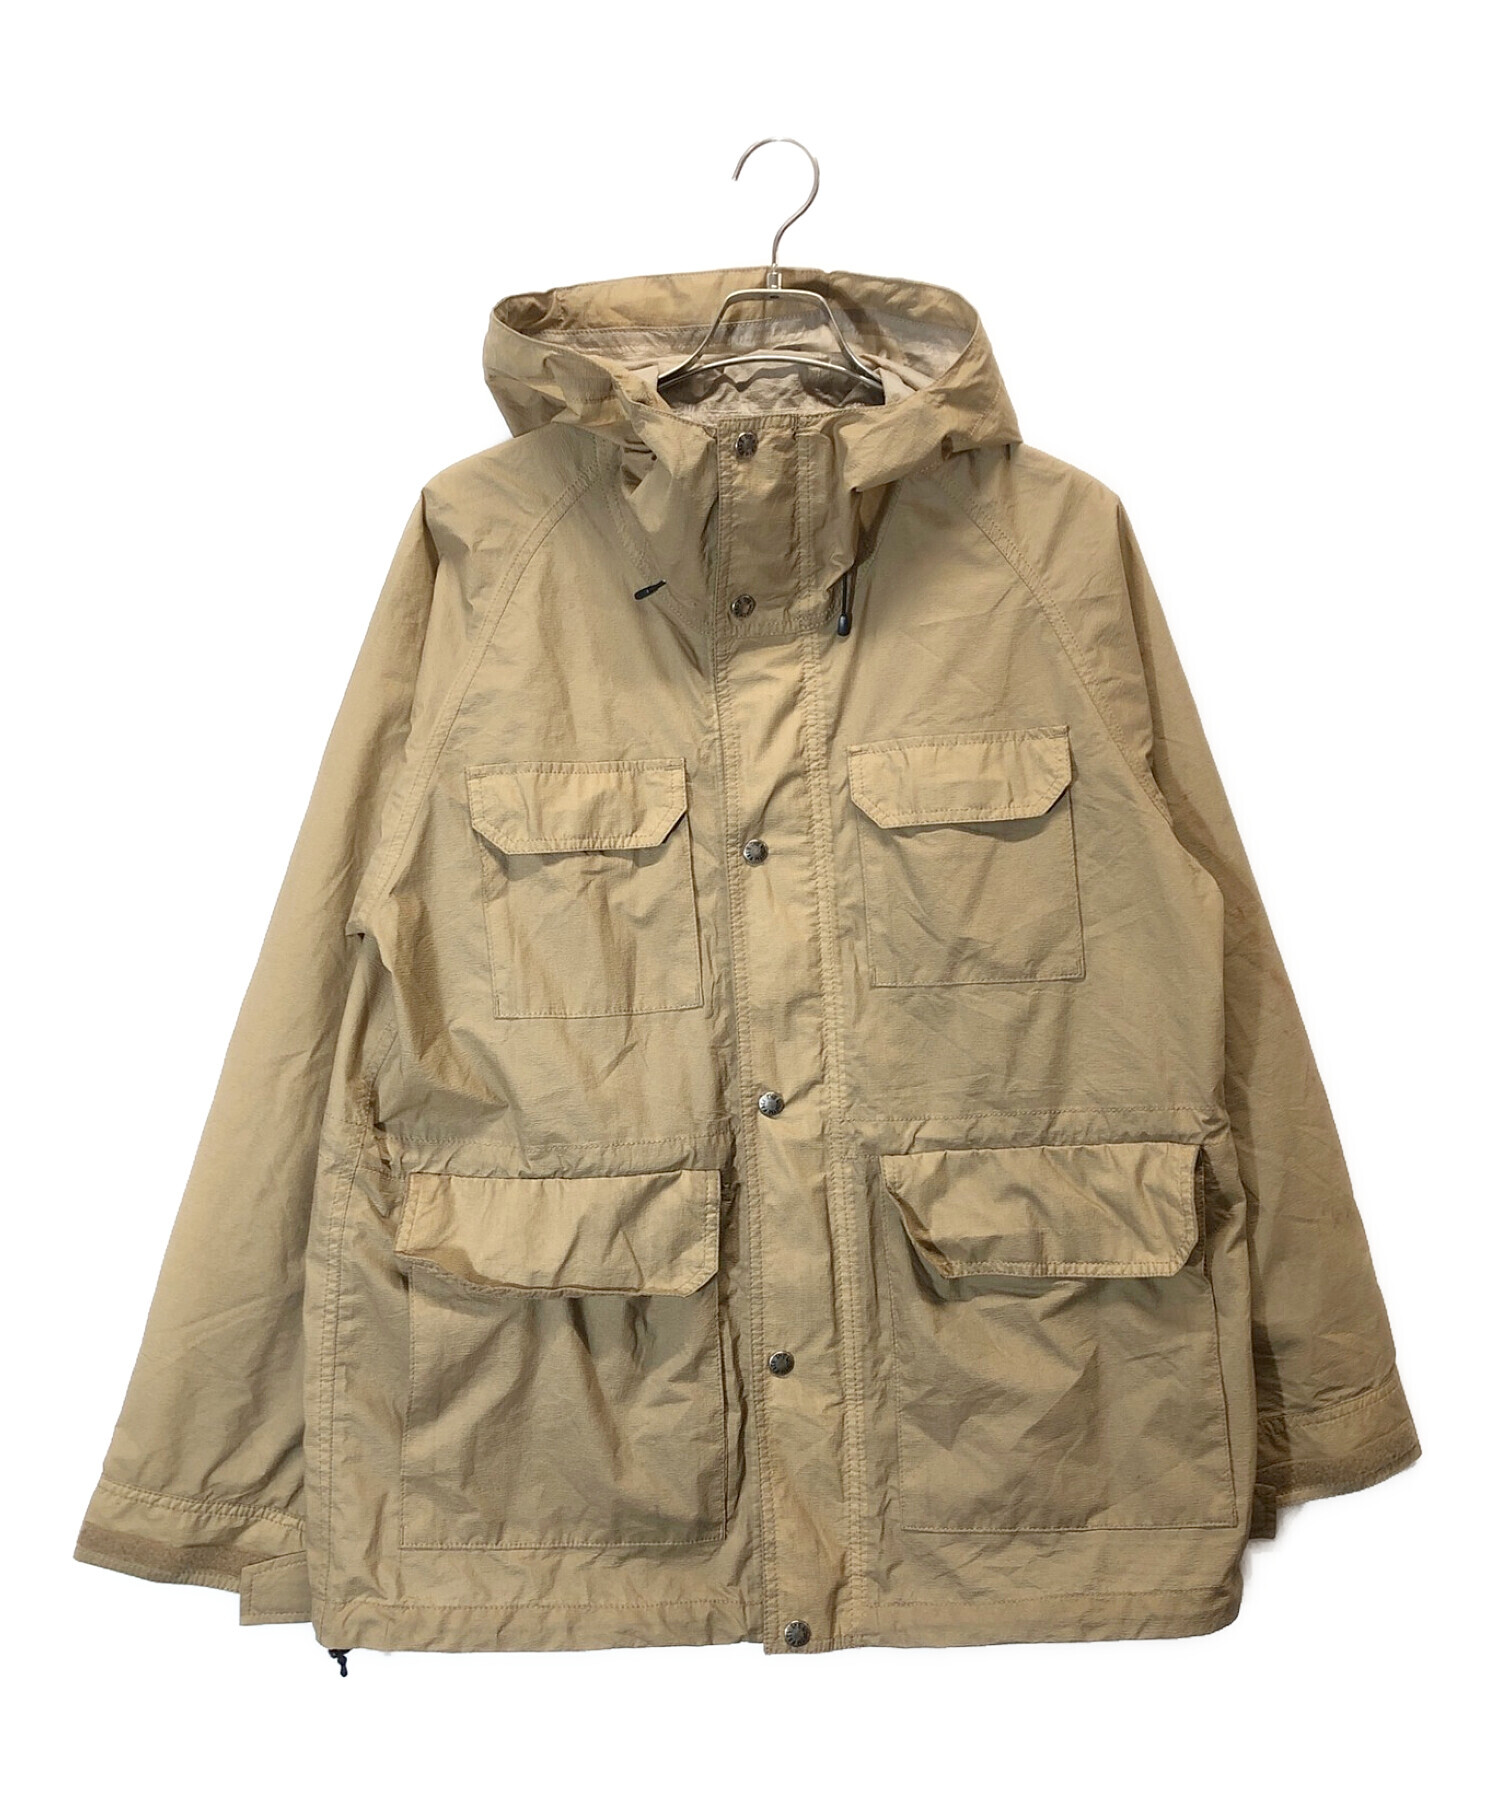 VINTAGE THE NORTH FACE MOUNTAIN PARKA多少の使用感あります